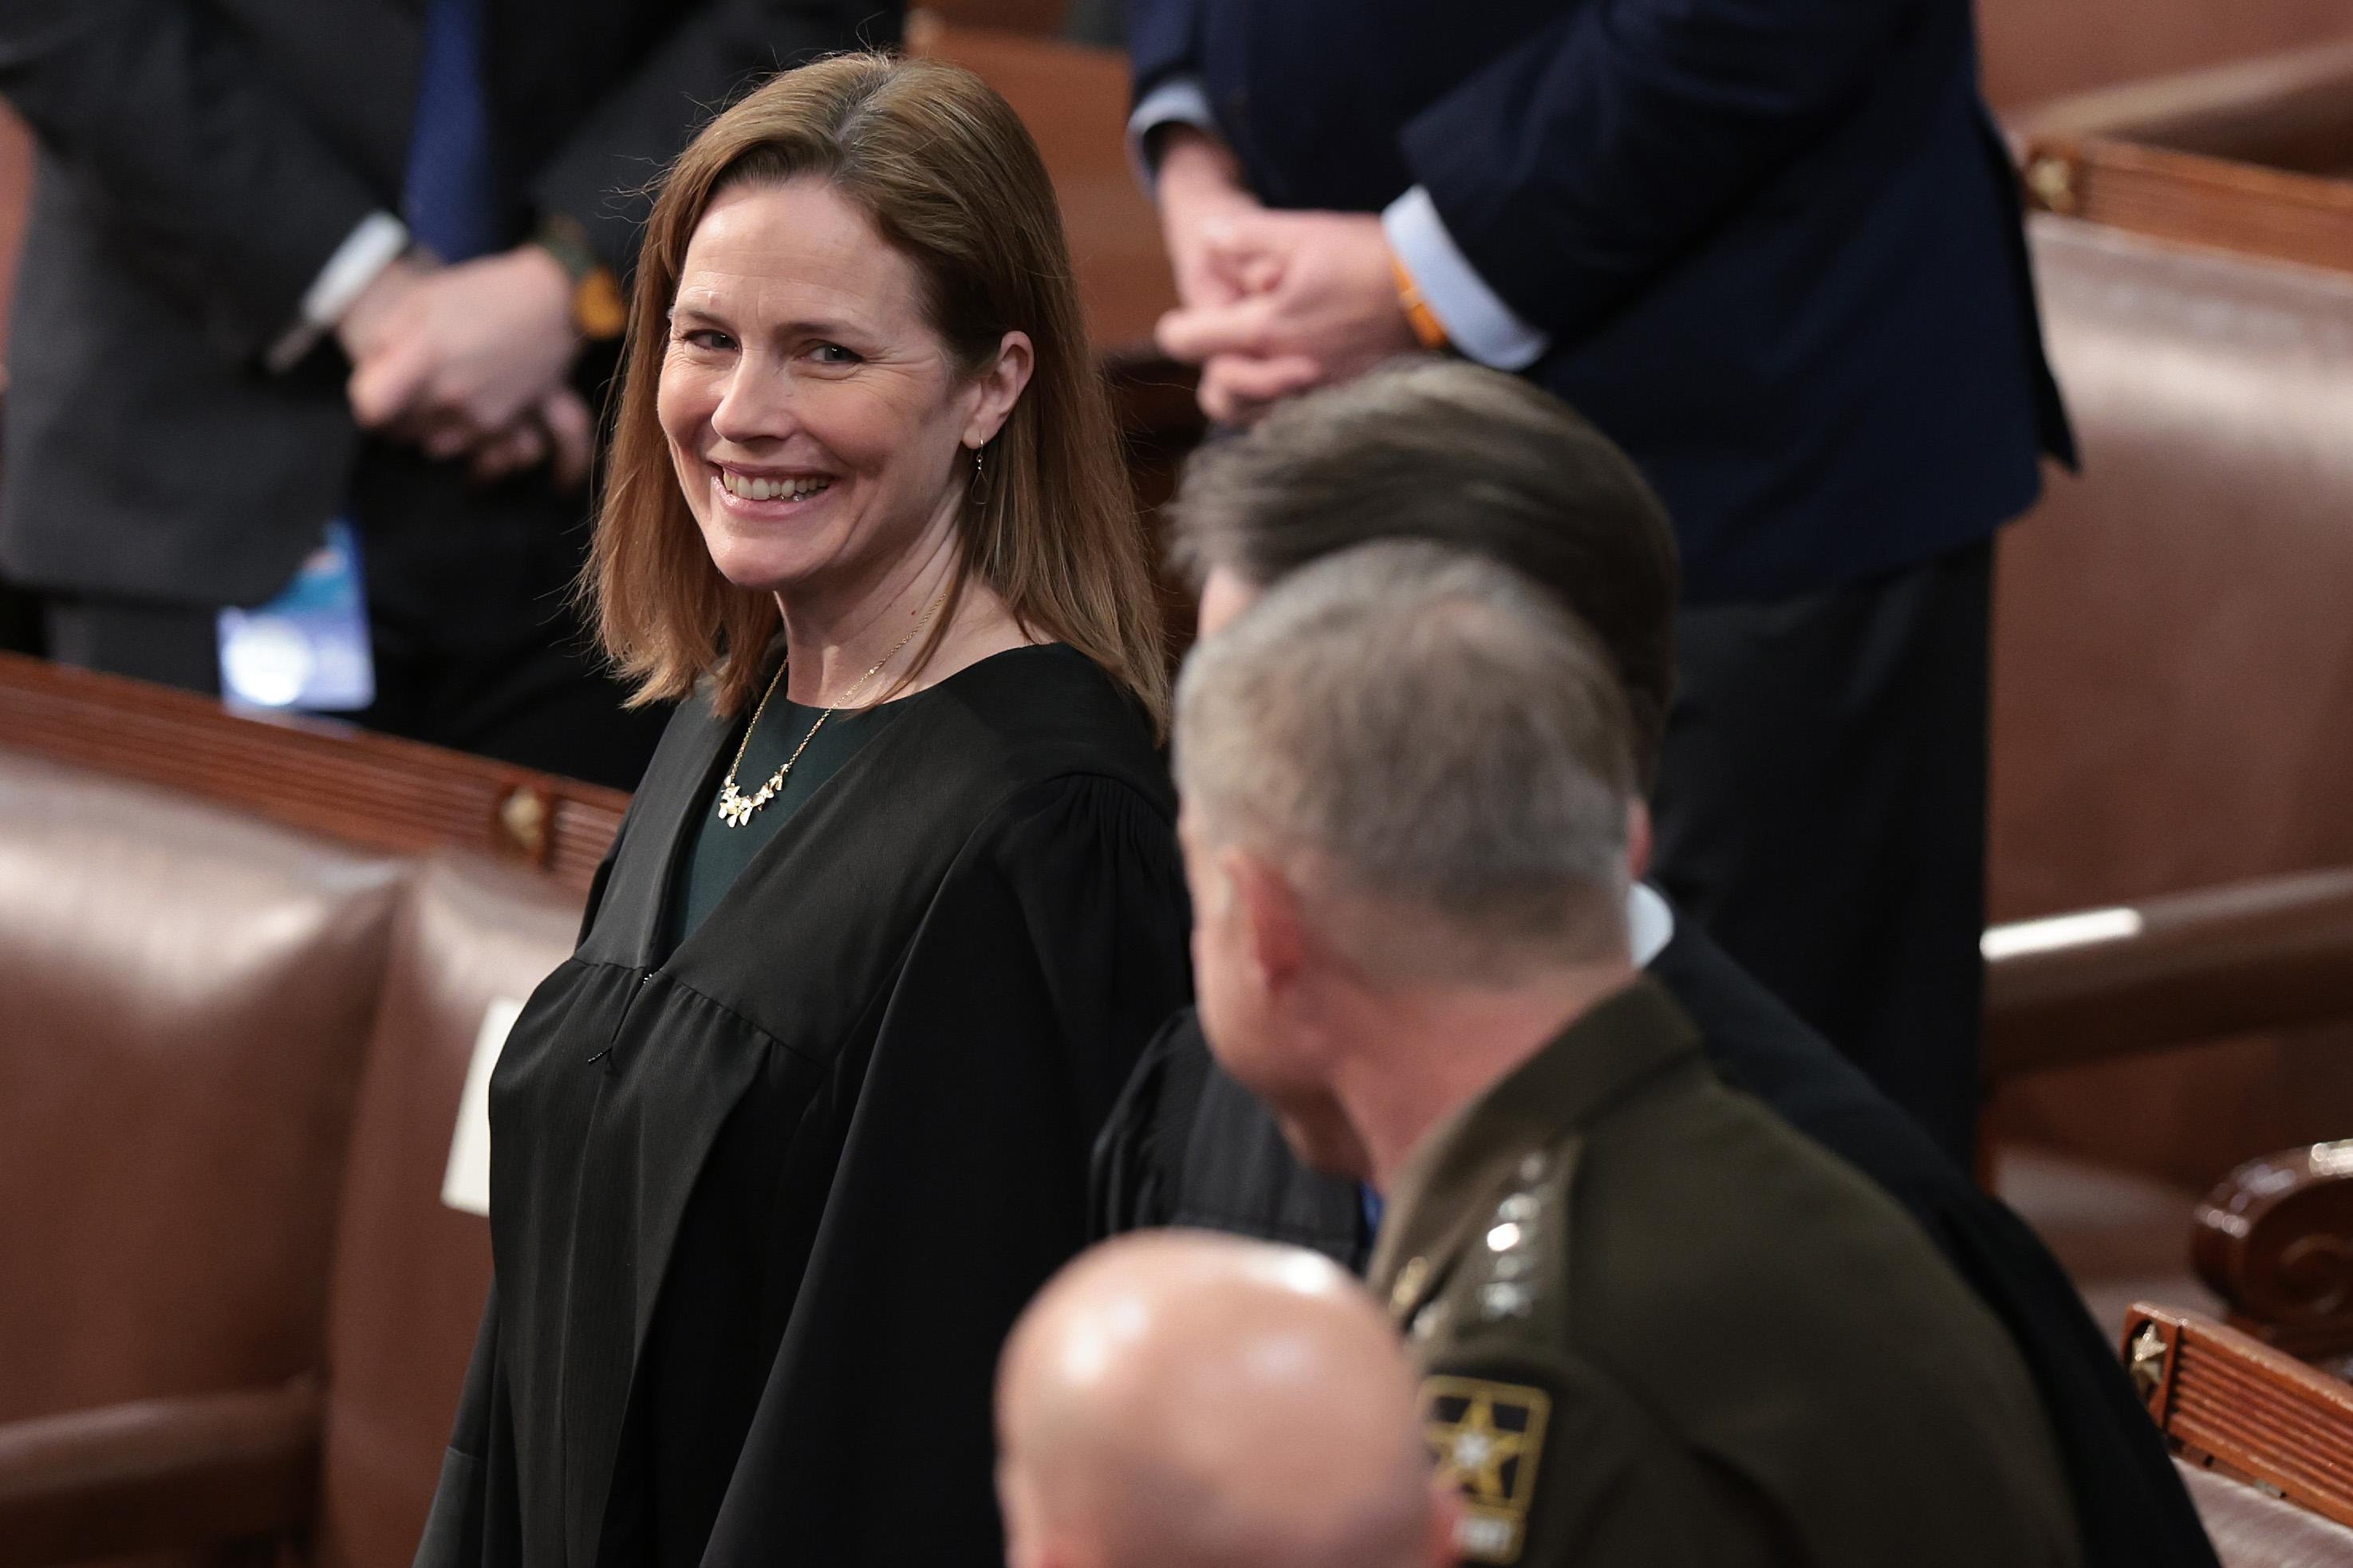 WASHINGTON, DC - MARCH 01: U.S. Supreme Court Associate Justice Amy Coney Barrett arrives in the House Chamber for U.S. President Joe Biden's State of the Union address at the U.S. Capitol March 01, 2022 in Washington, DC. During his first State of the Union address Biden is expected to highlight his administration's efforts to lead a global response to the Russian invasion of Ukraine, work to curb inflation and to bring the country out of the COVID-19 pandemic. (Photo by Win McNamee/Getty Images)